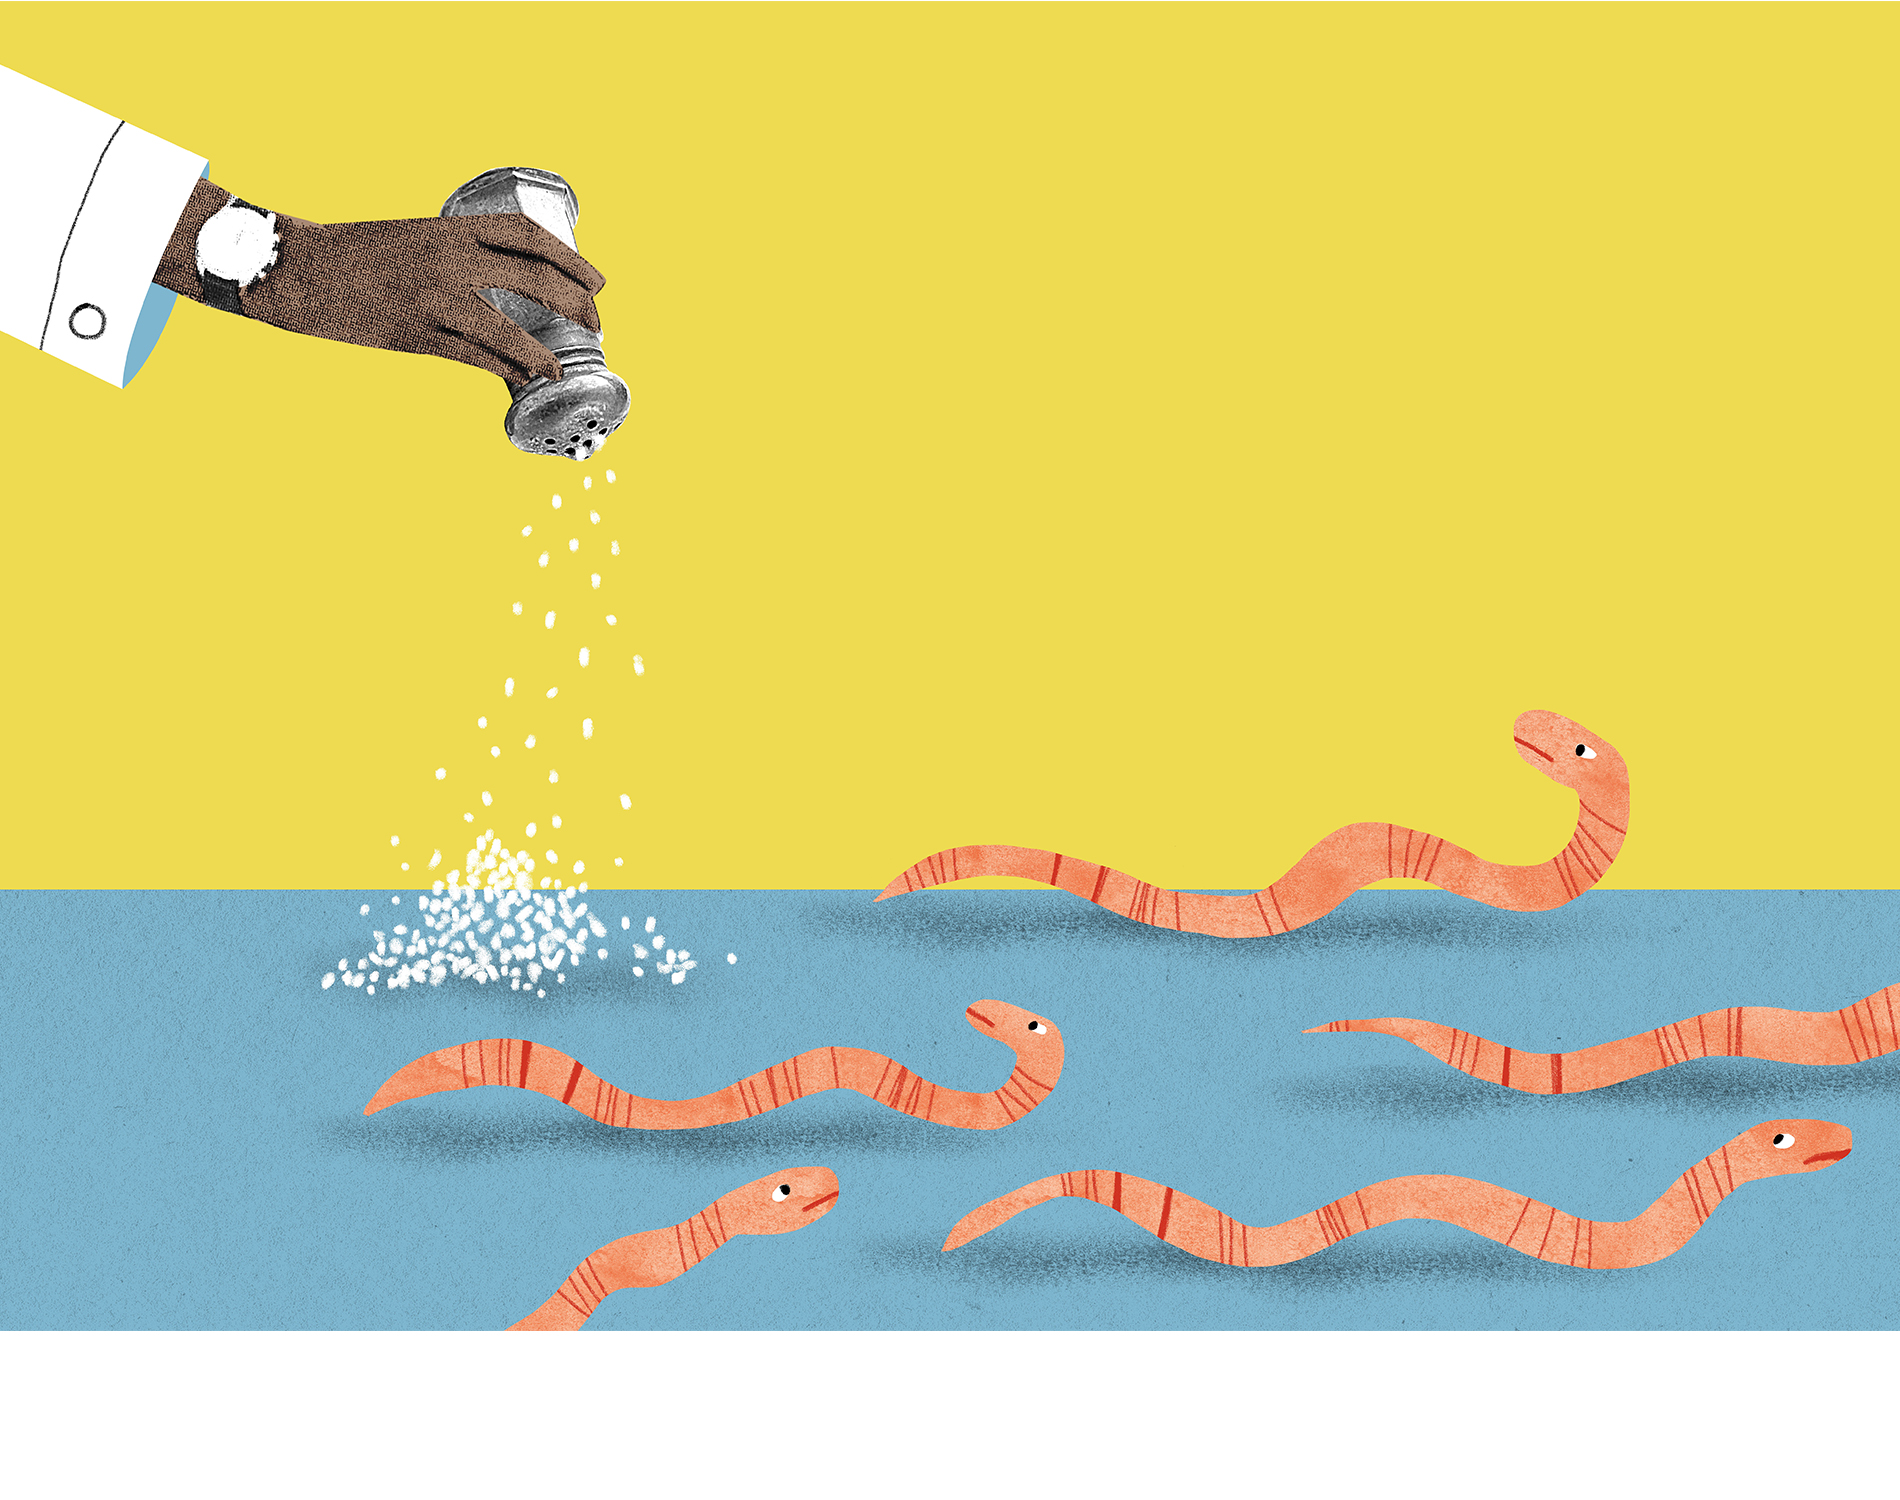 Playful yellow and blue illustration shows a scientist shaking salt in the direction of worms.